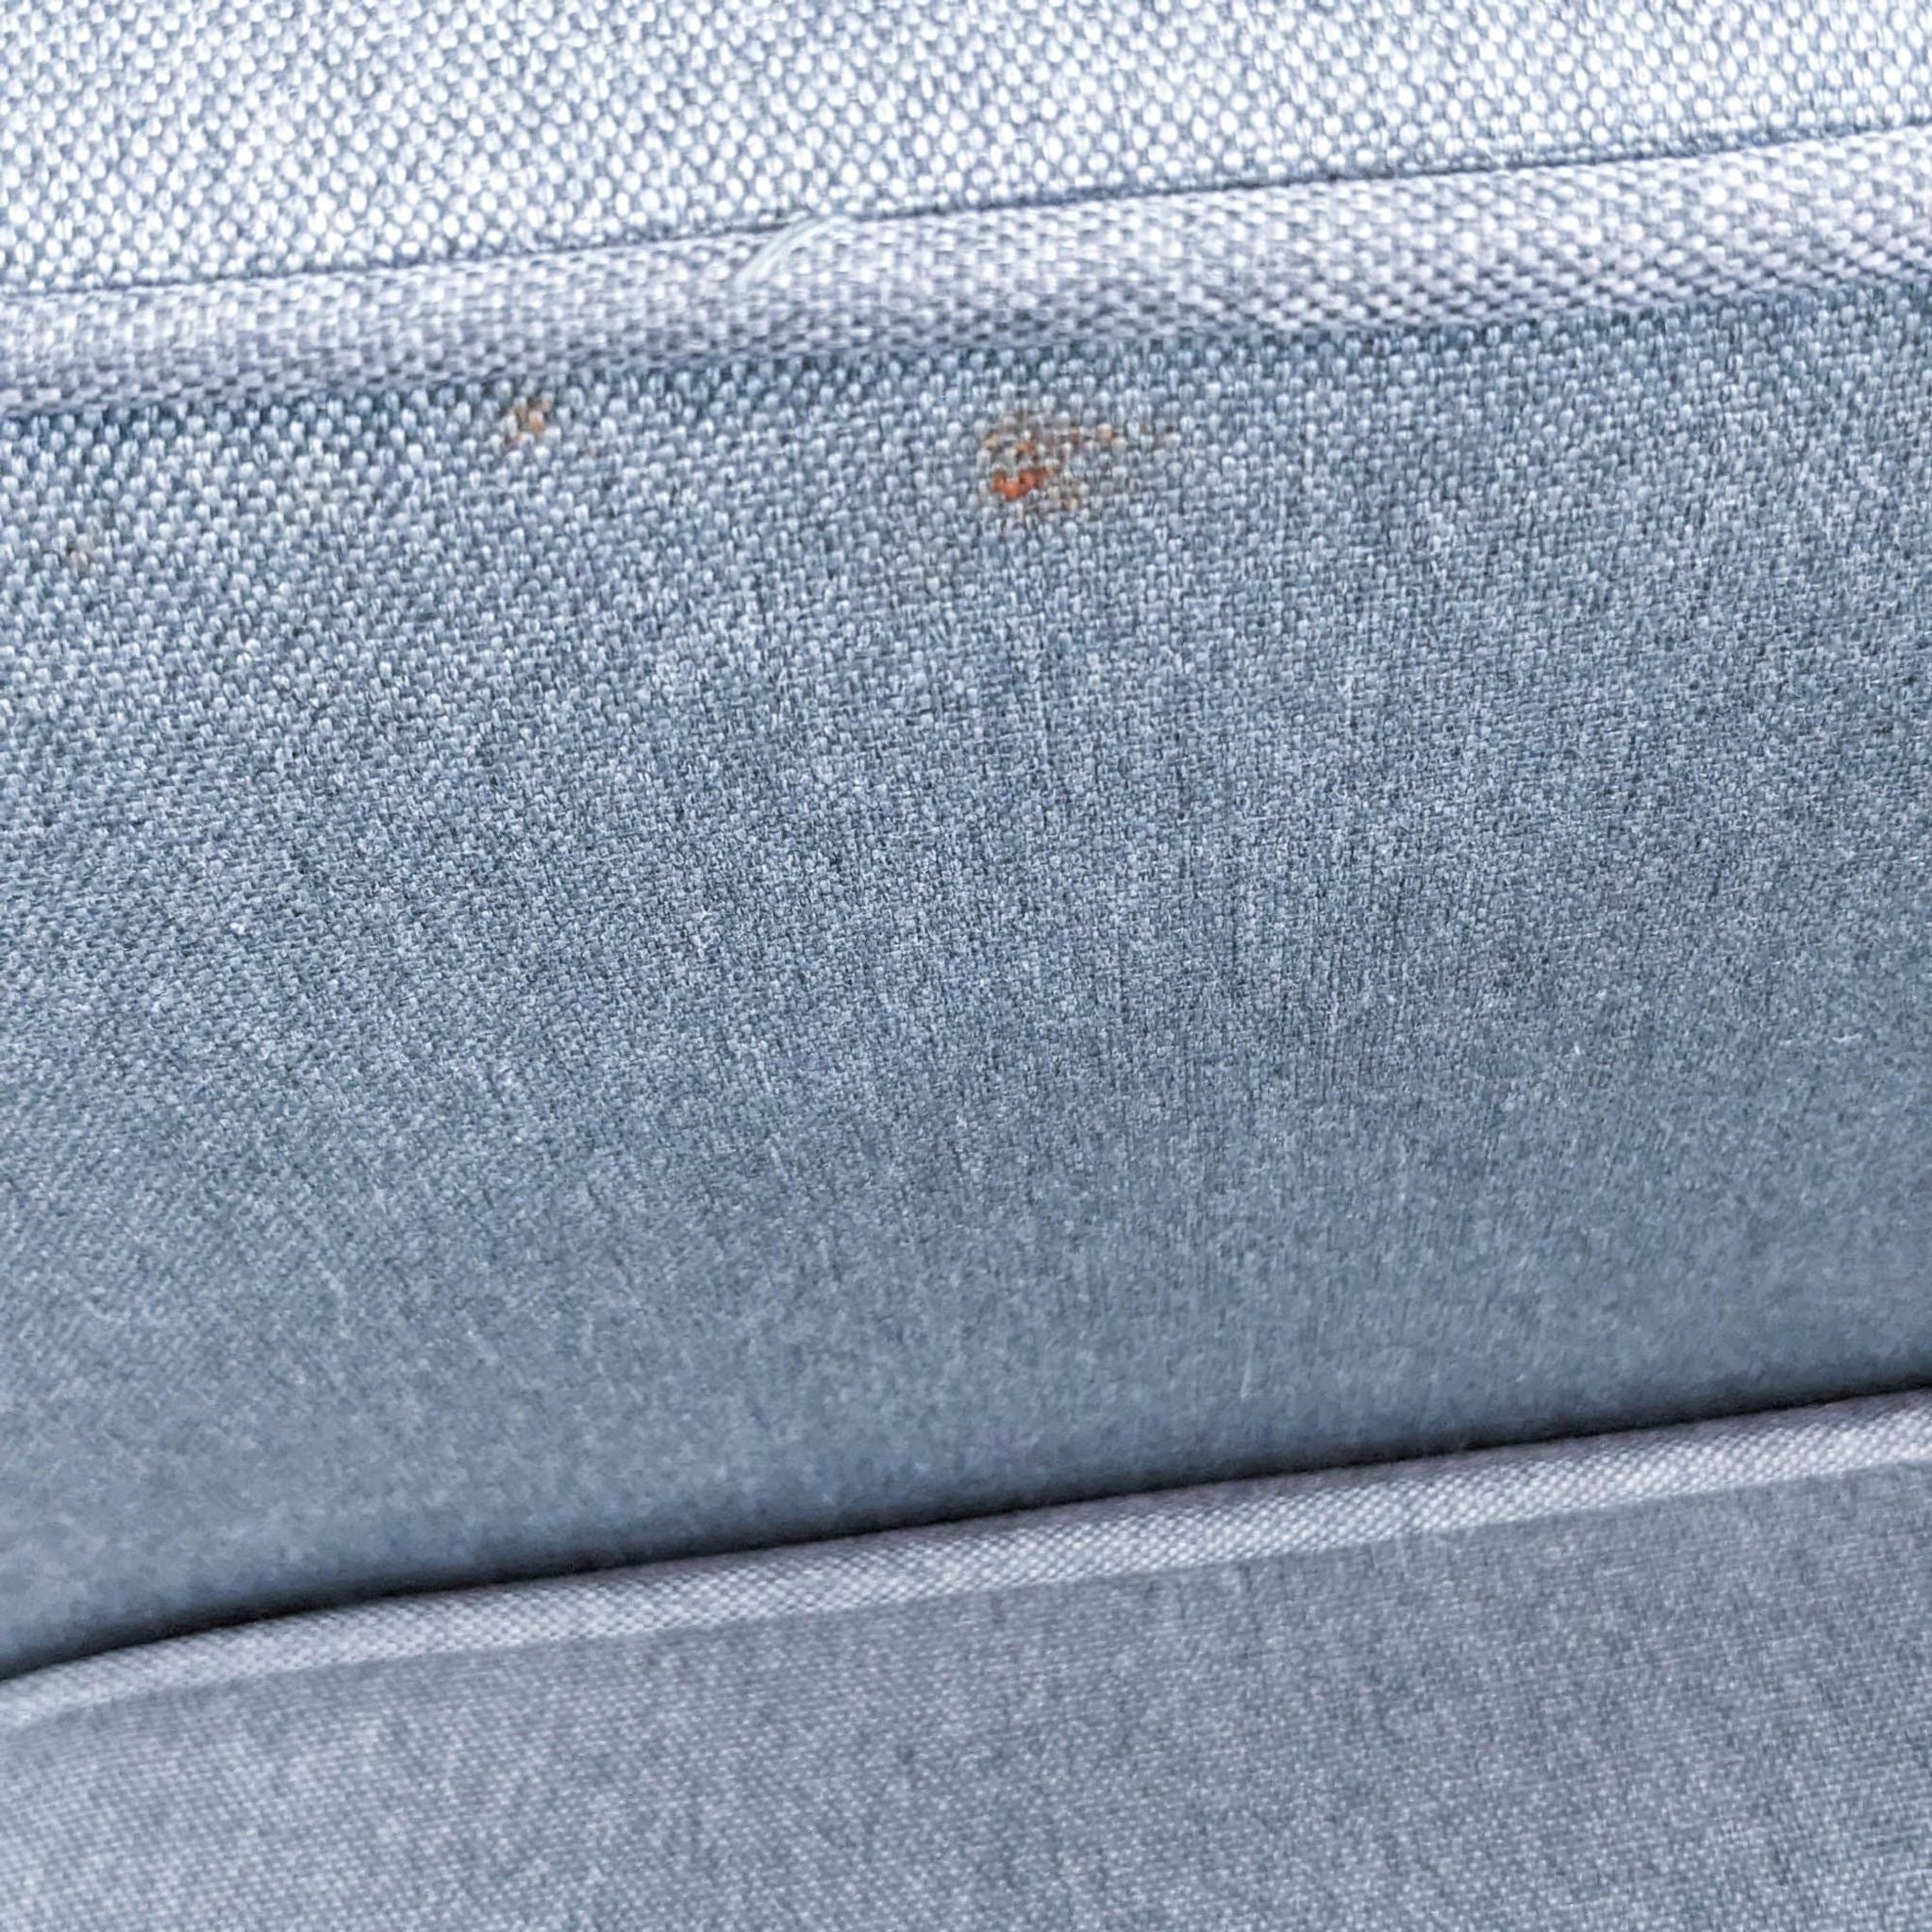 Close-up of Zinus sofa fabric texture with button back cushions, highlighting piped detailing and material quality.